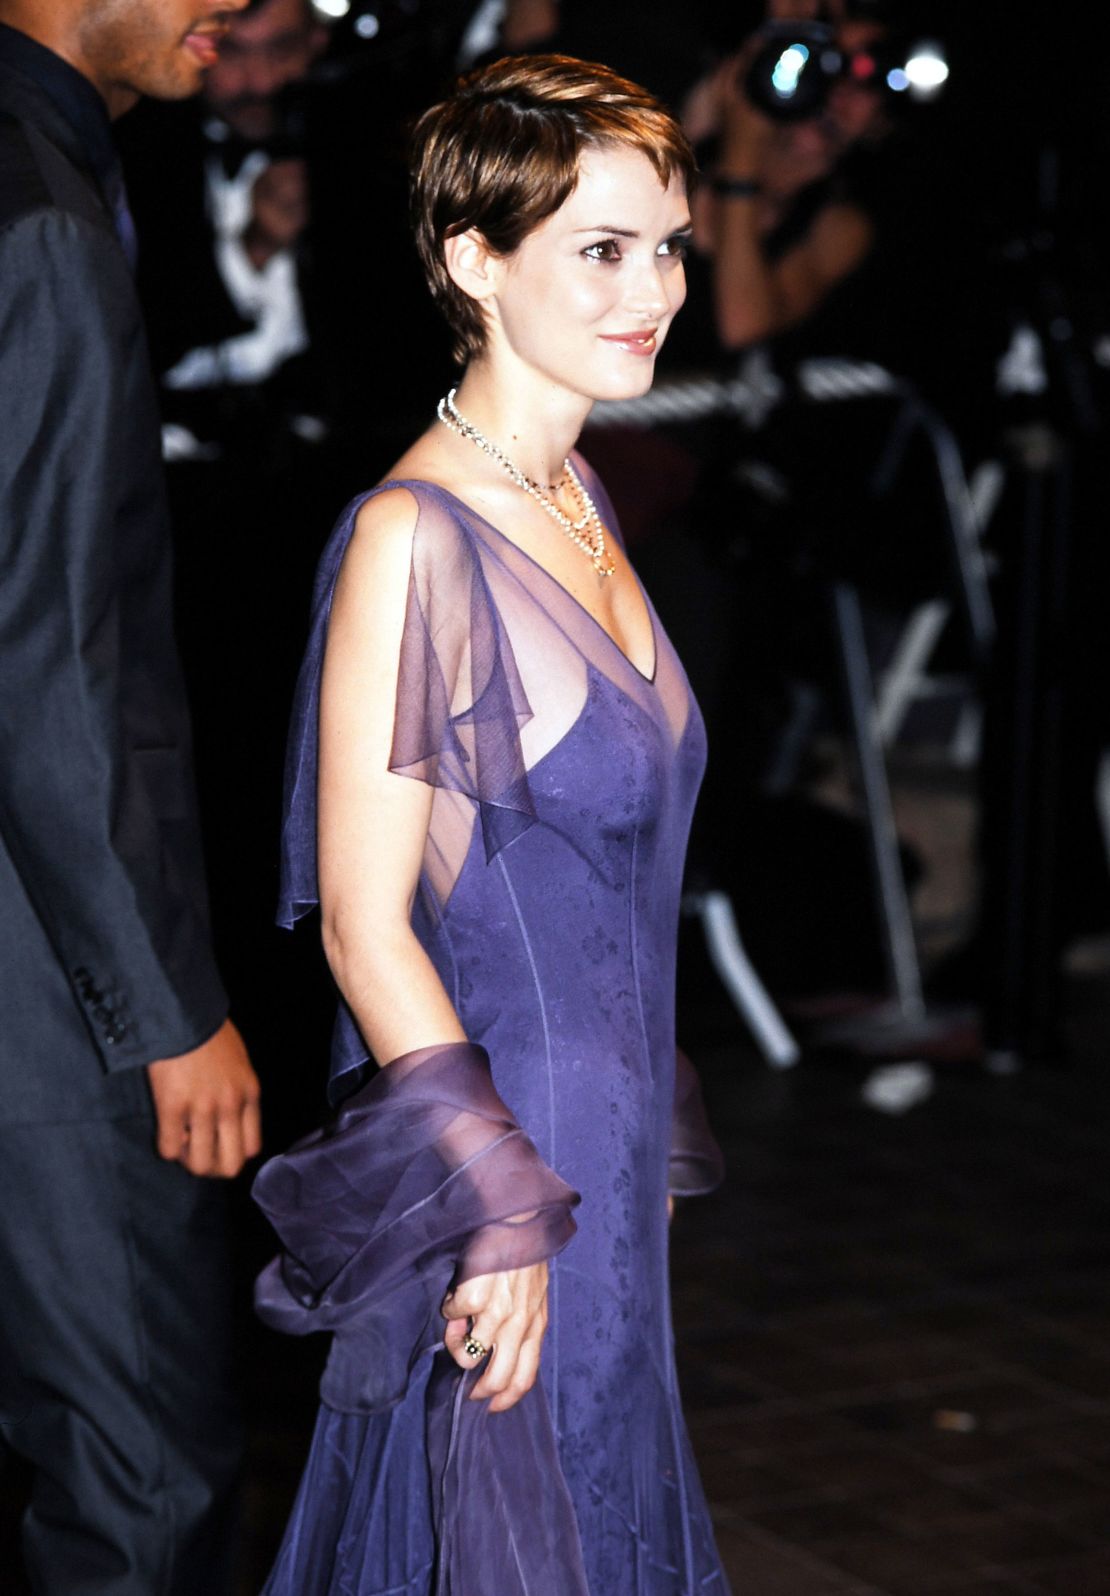 Winona Ryder at the 51st Cannes film festival in 1998 wearing a purple organza dress.